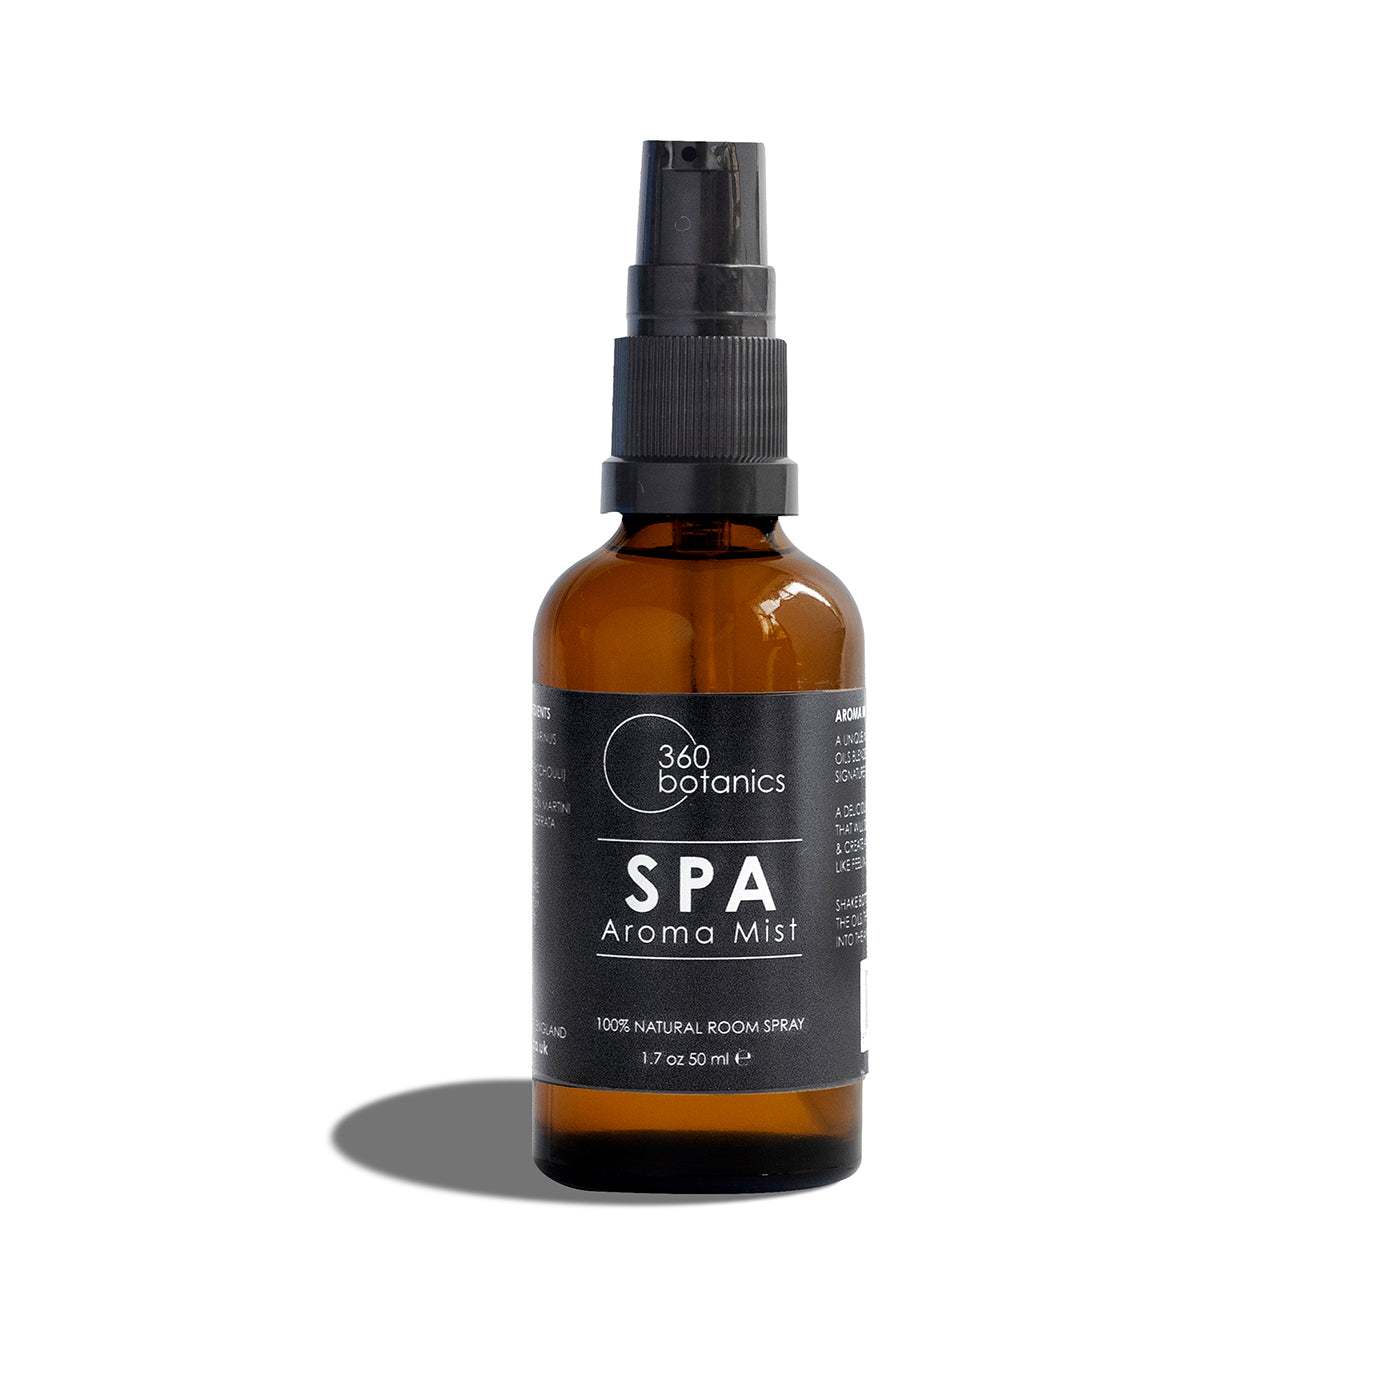  A 360 Botanics SPA Aroma Mist bottle with a black label, made of amber glass with a spray nozzle, against a white background casting a soft shadow.